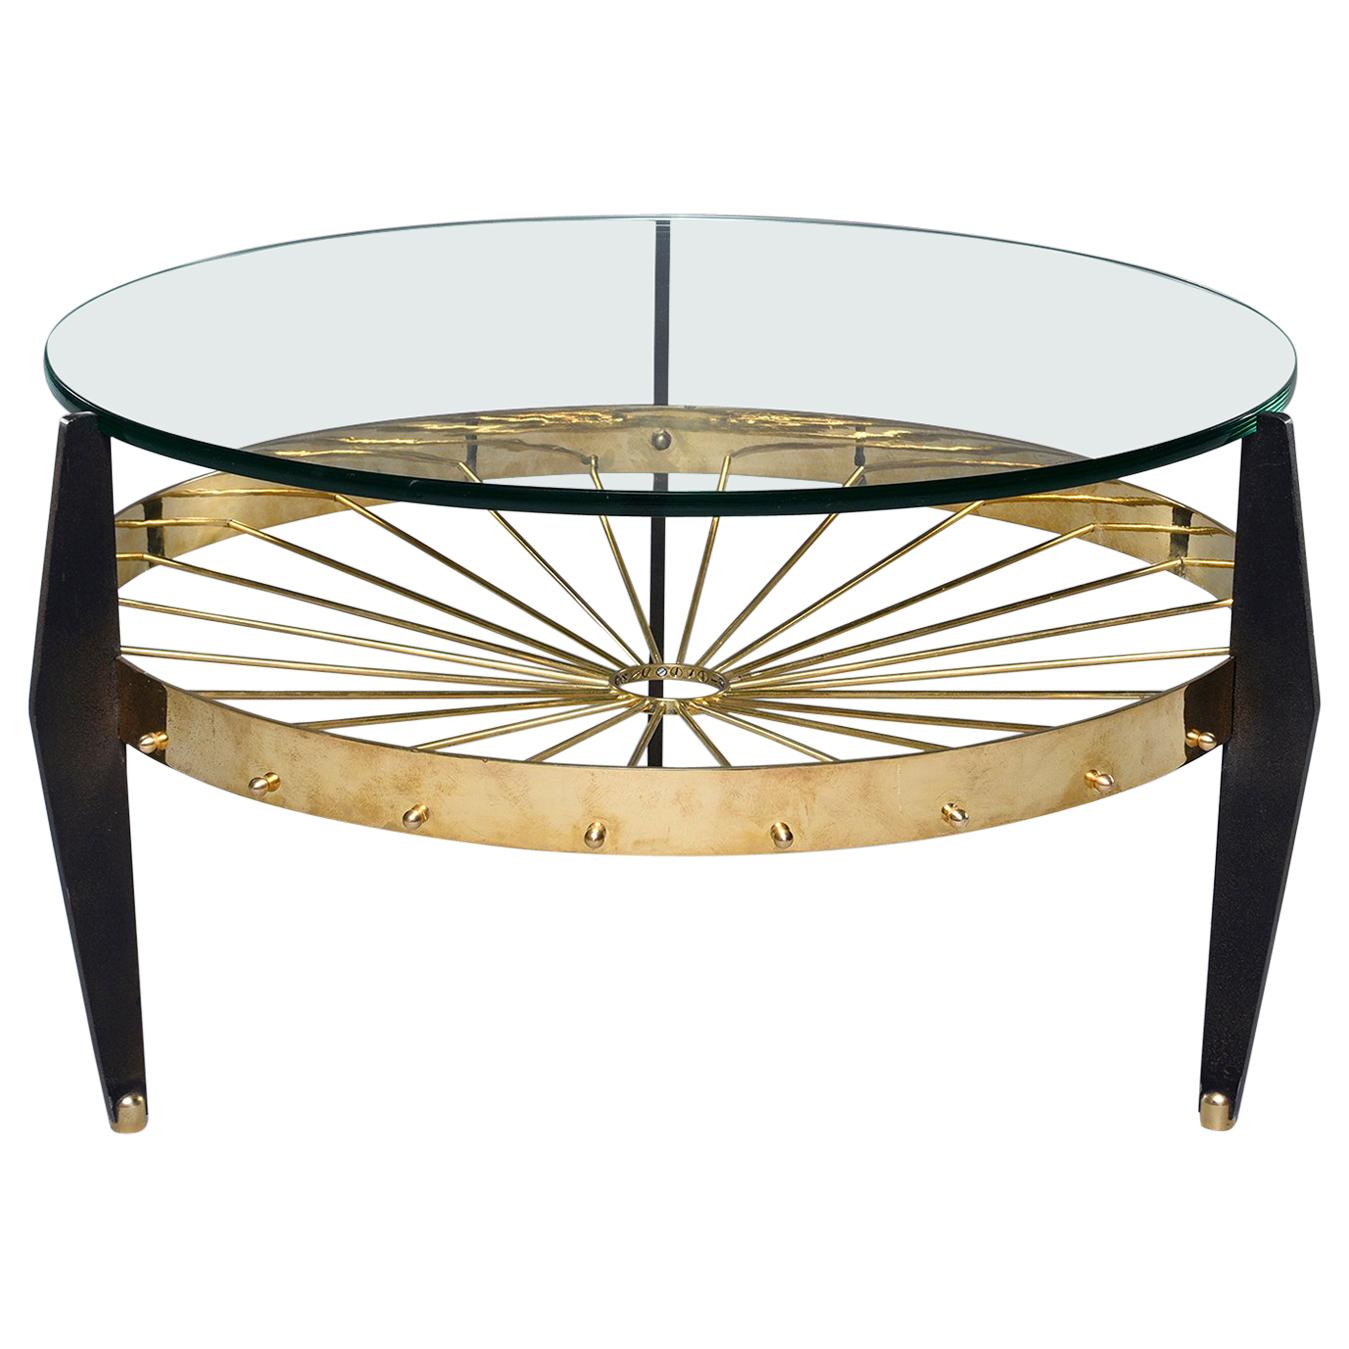 Italian Two-Tier Table with Brass Spokes Wood Legs and Glass Top